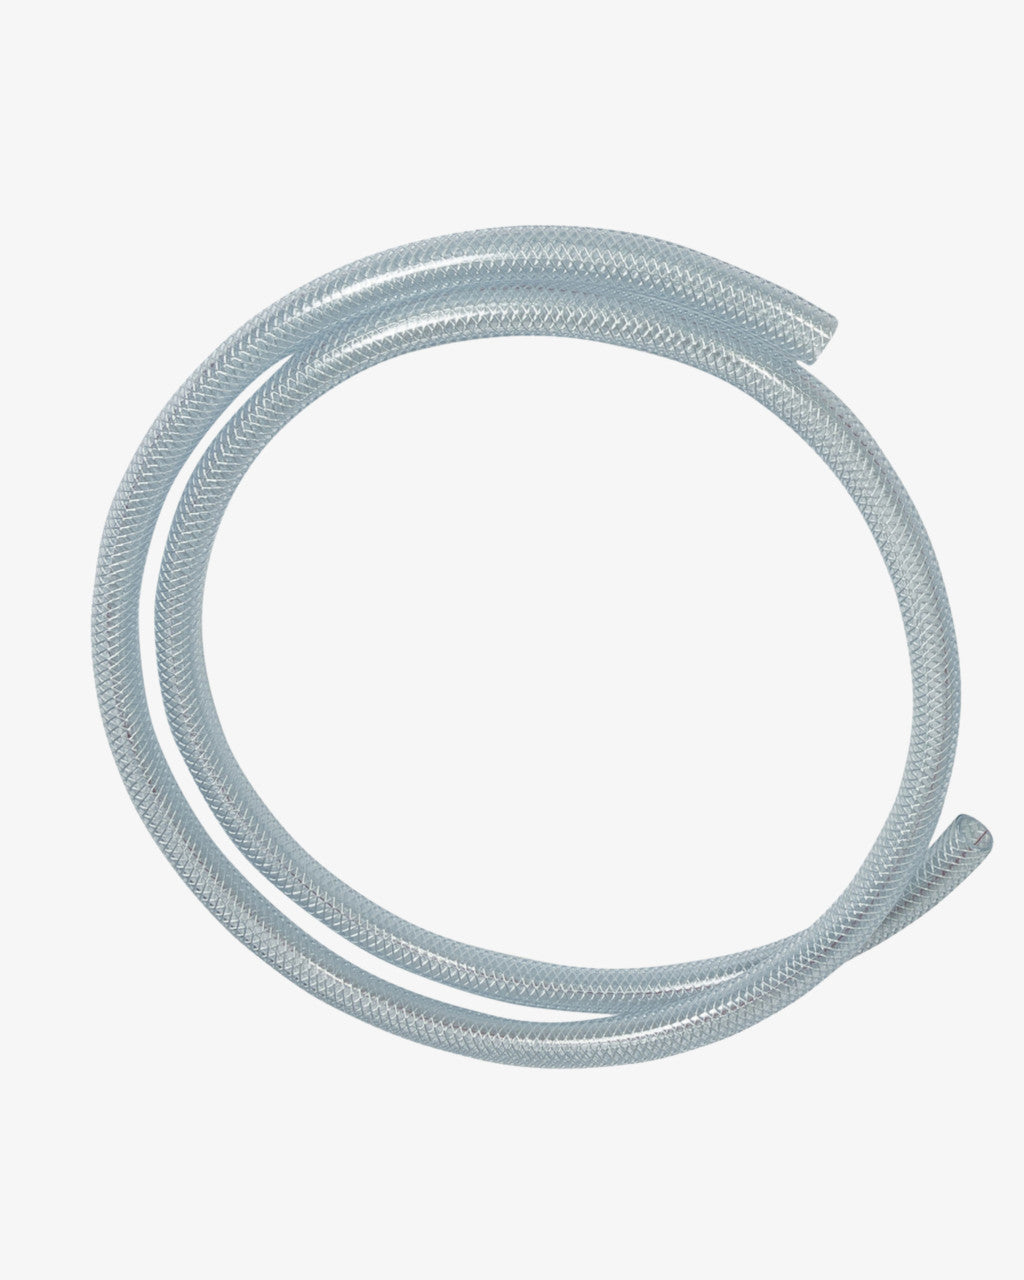 Drain Tubing + Overflow tubing | Tubing for water softener drain and overflow connections